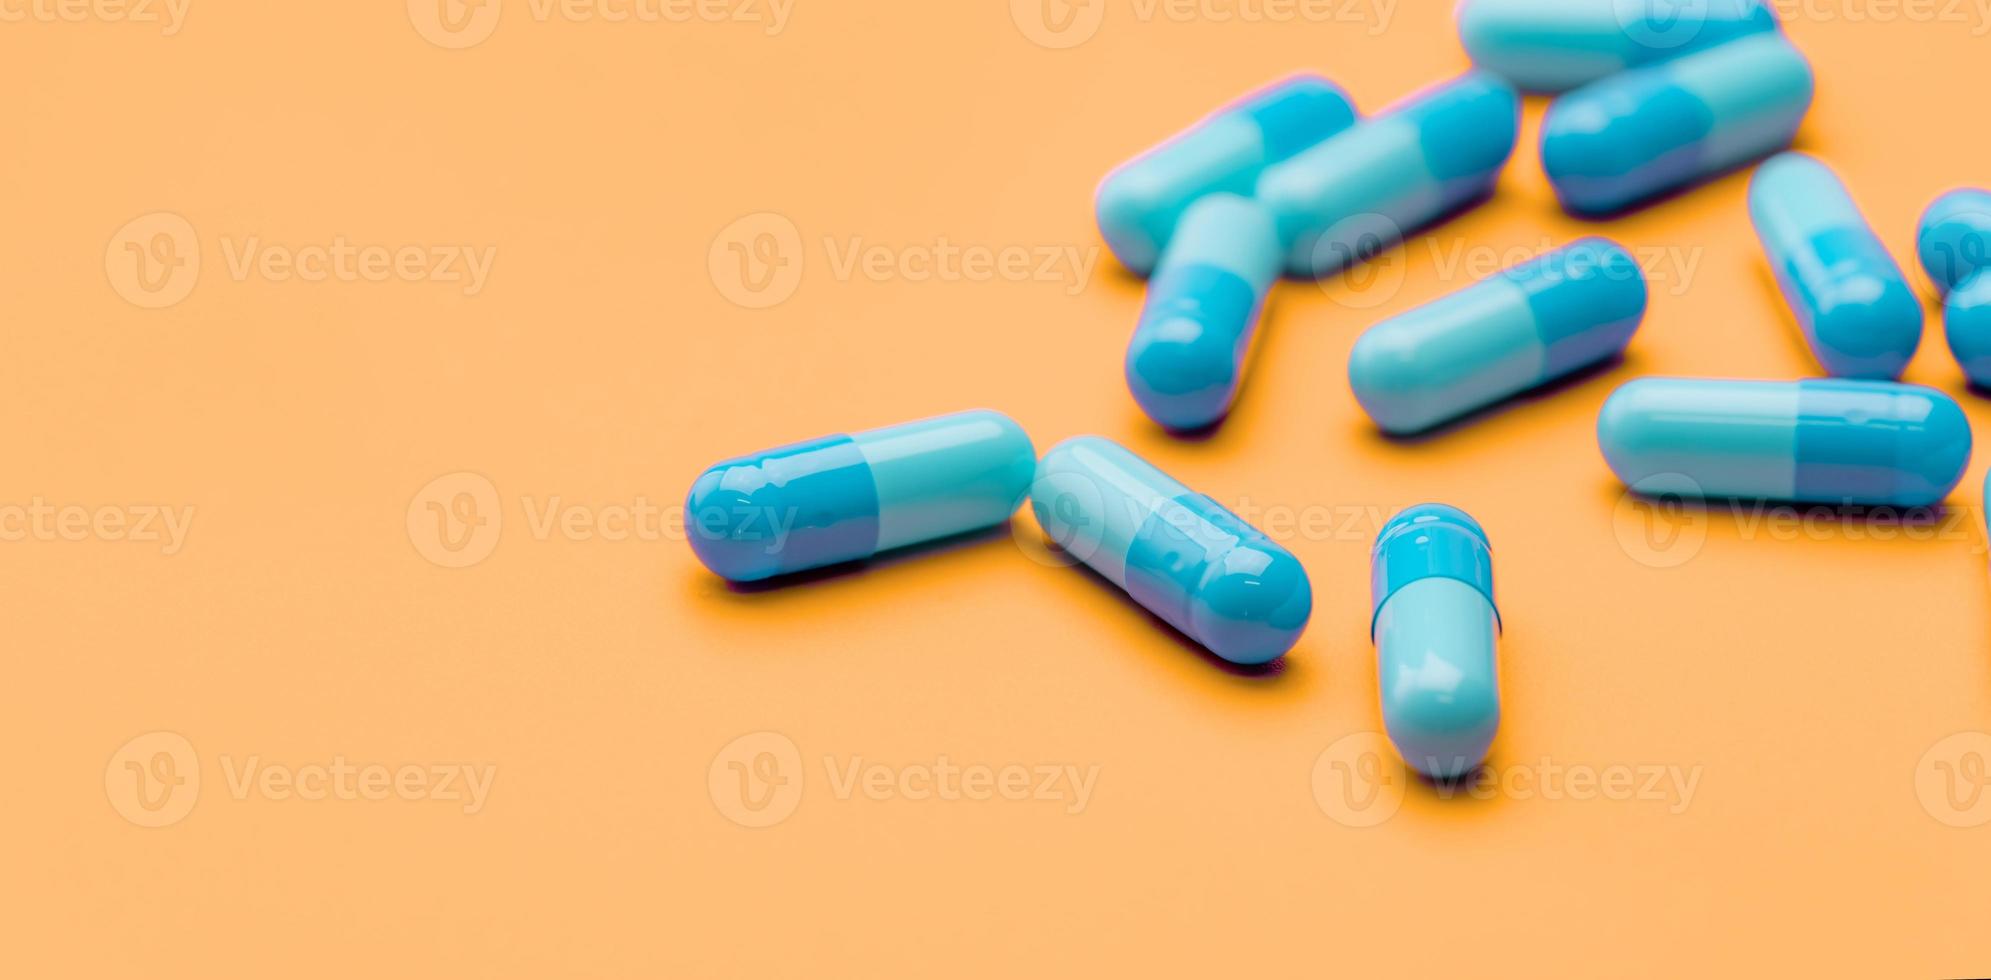 Blue antibiotic capsule pills spread on yellow background. Antibiotic drug resistance. Pharmaceutical industry. Healthcare and medicine concept. Health budget concept. Capsule manufacturing industry. photo